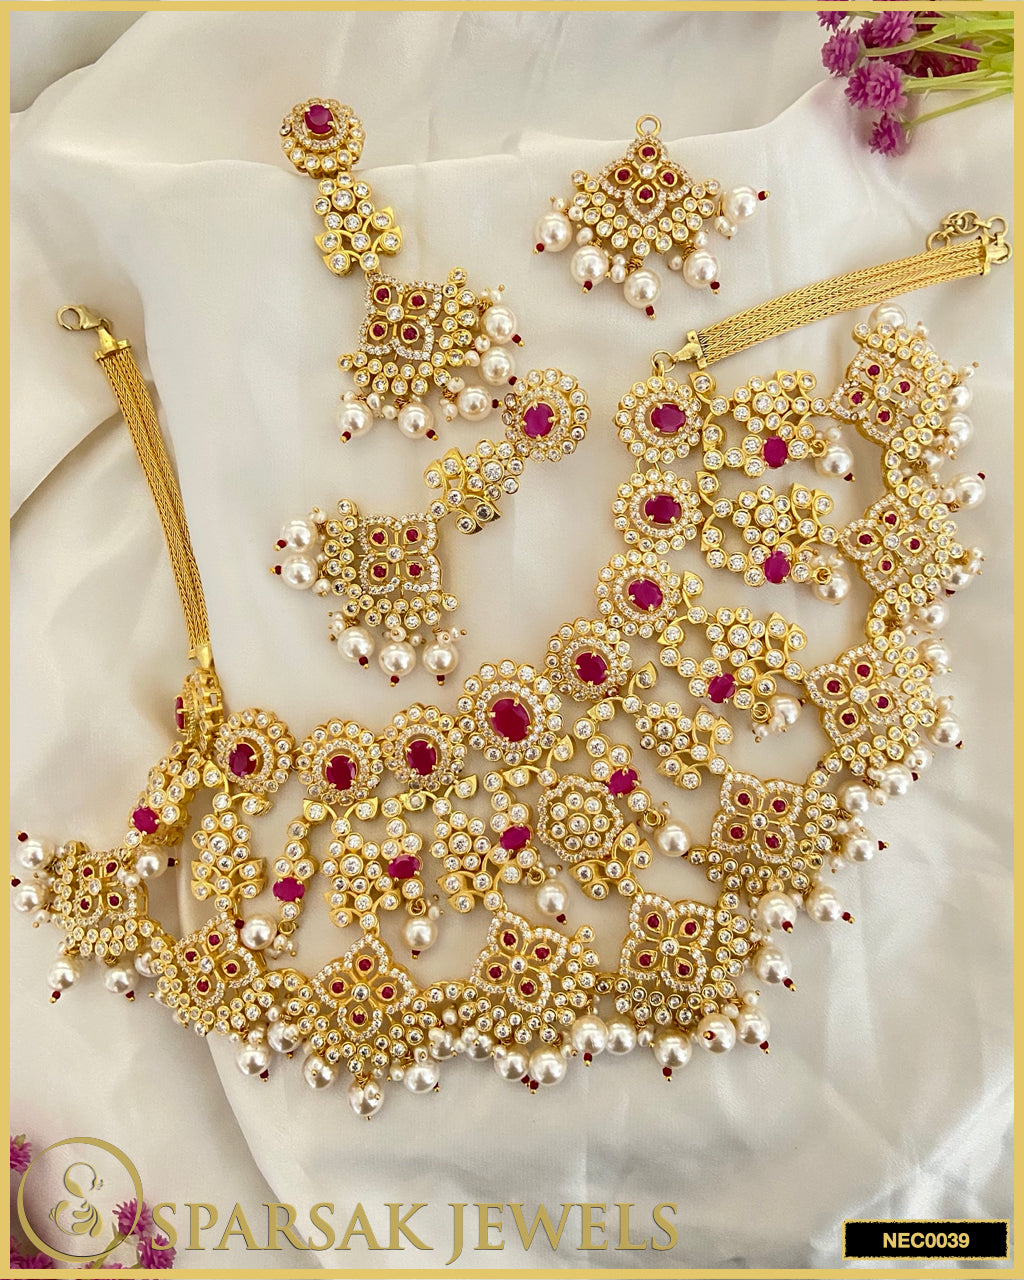 Gold Polished Handcrafted Bridal Necklace Set in Silver with Cubic Zirconia & Ruby by Sparsak Jewels